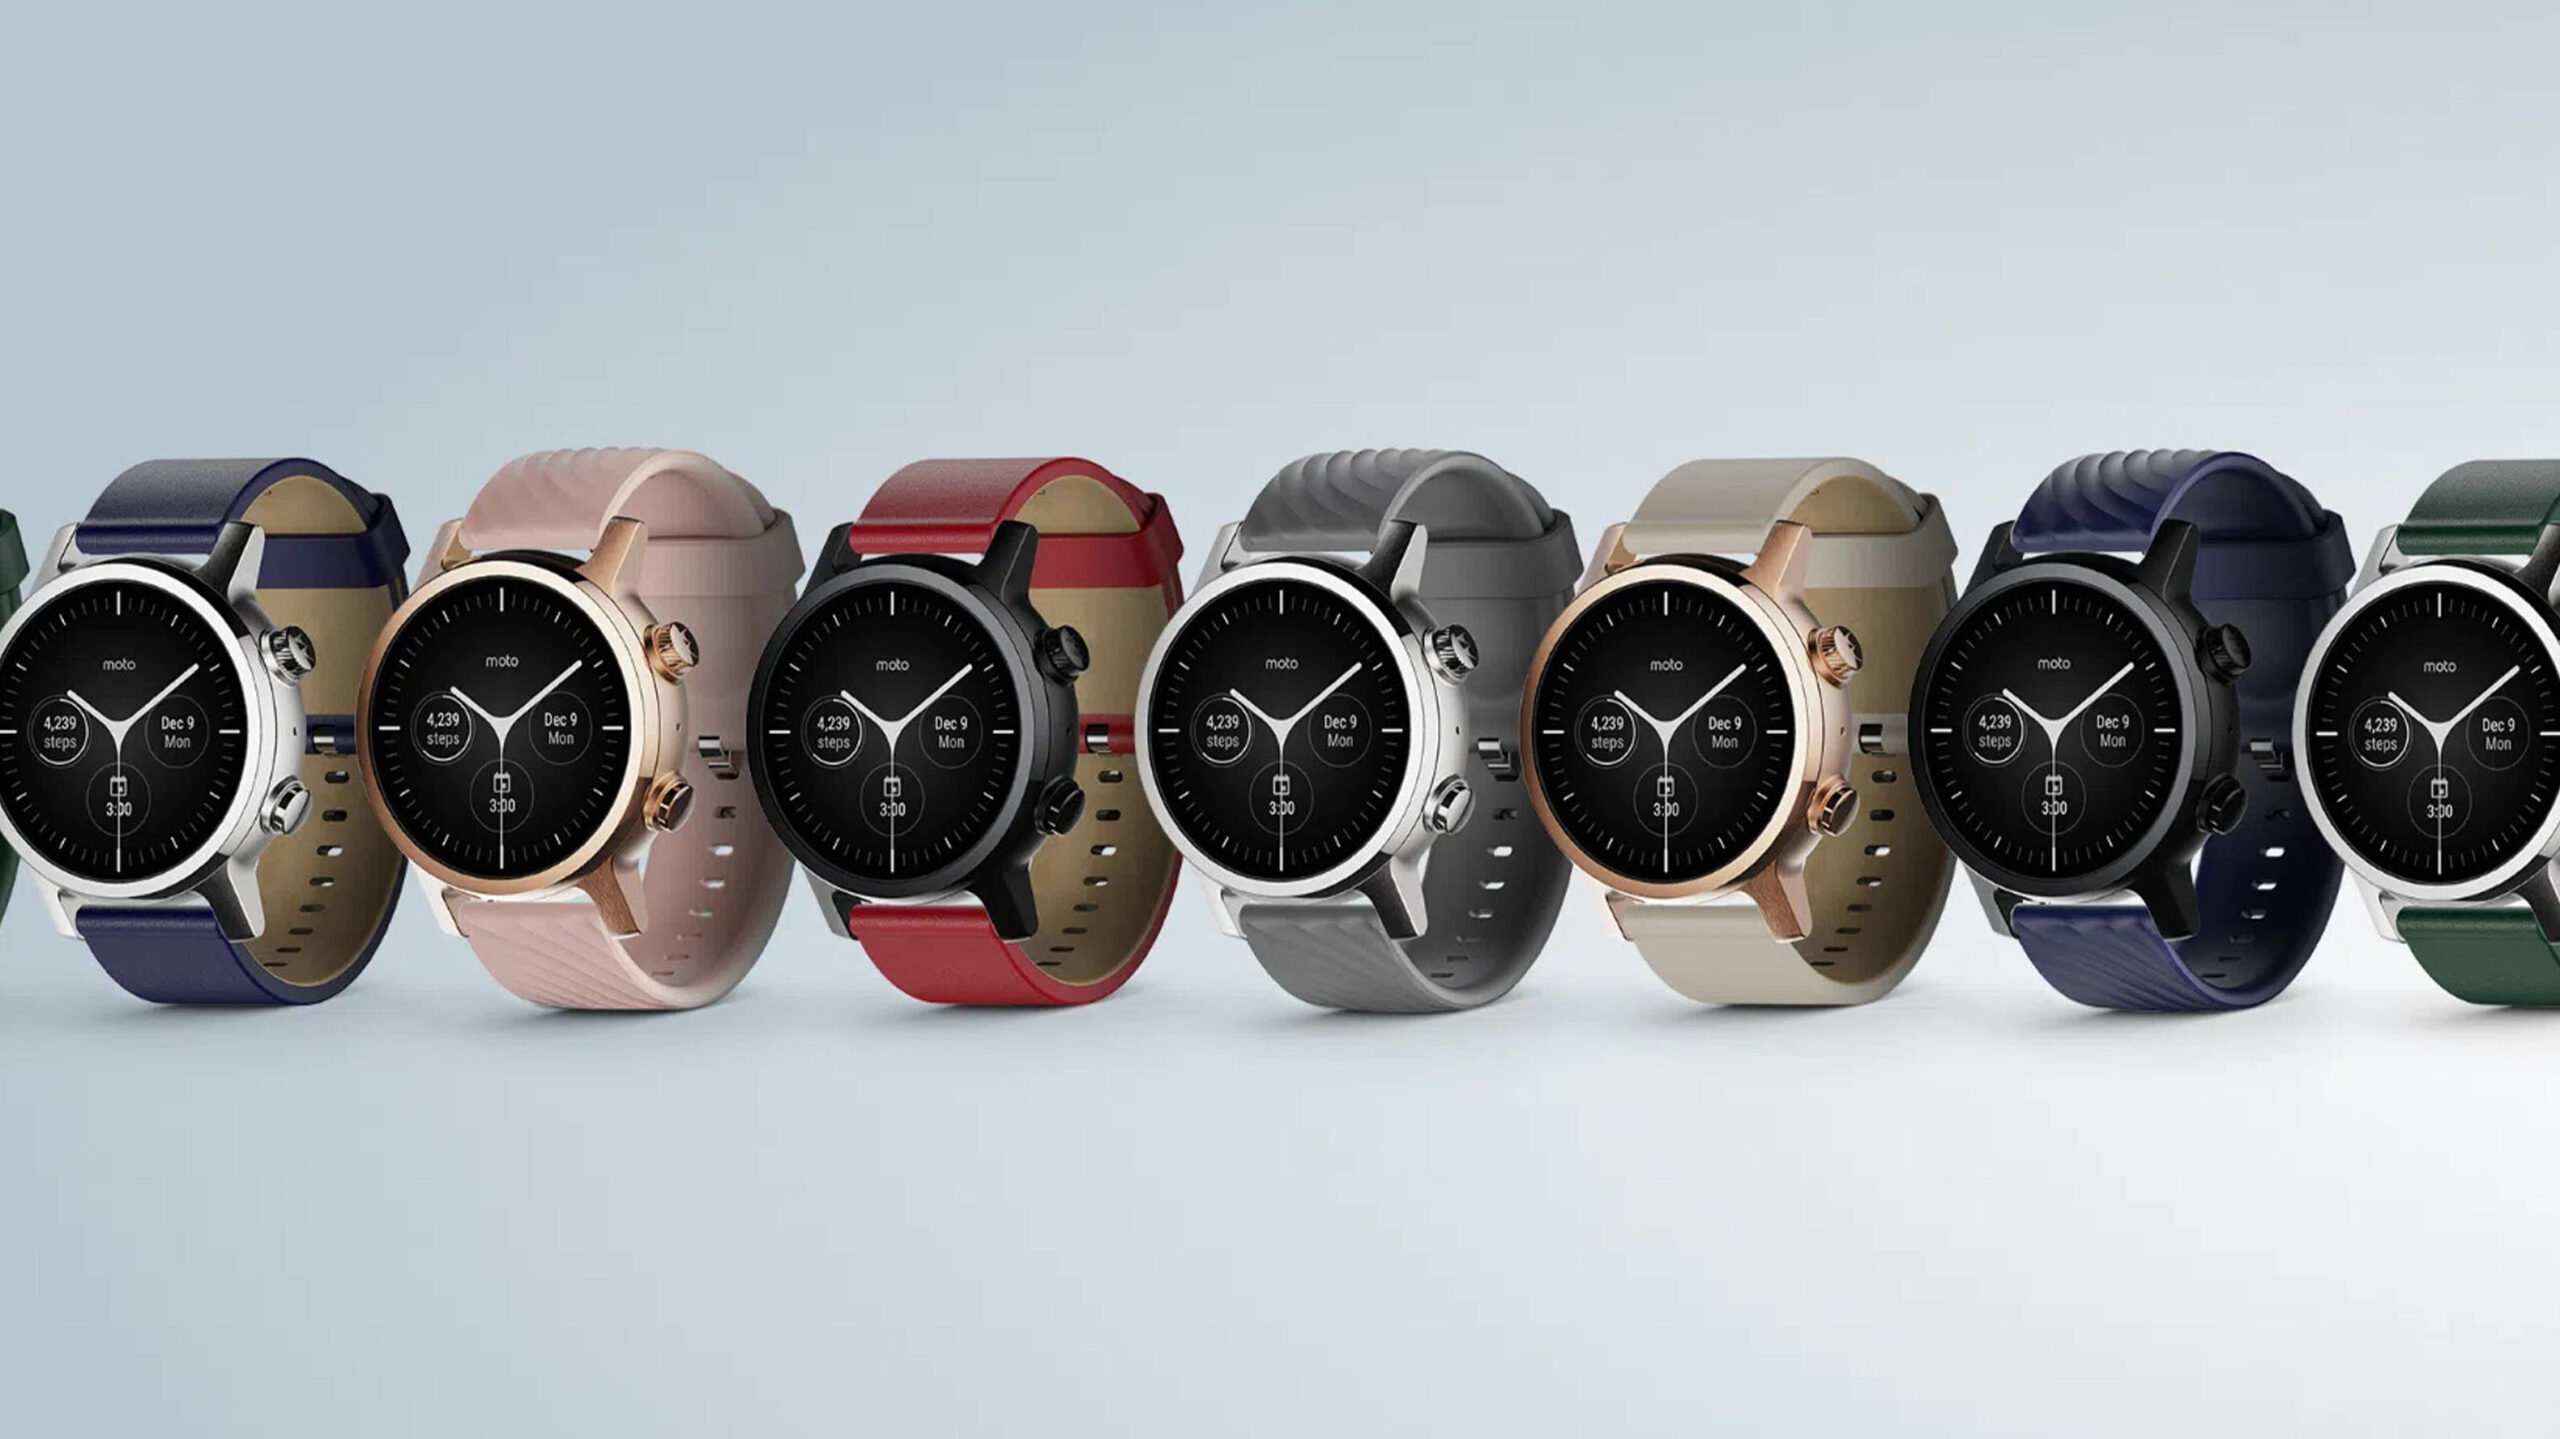 Three new Motorola Wear OS watches could show up in 2021